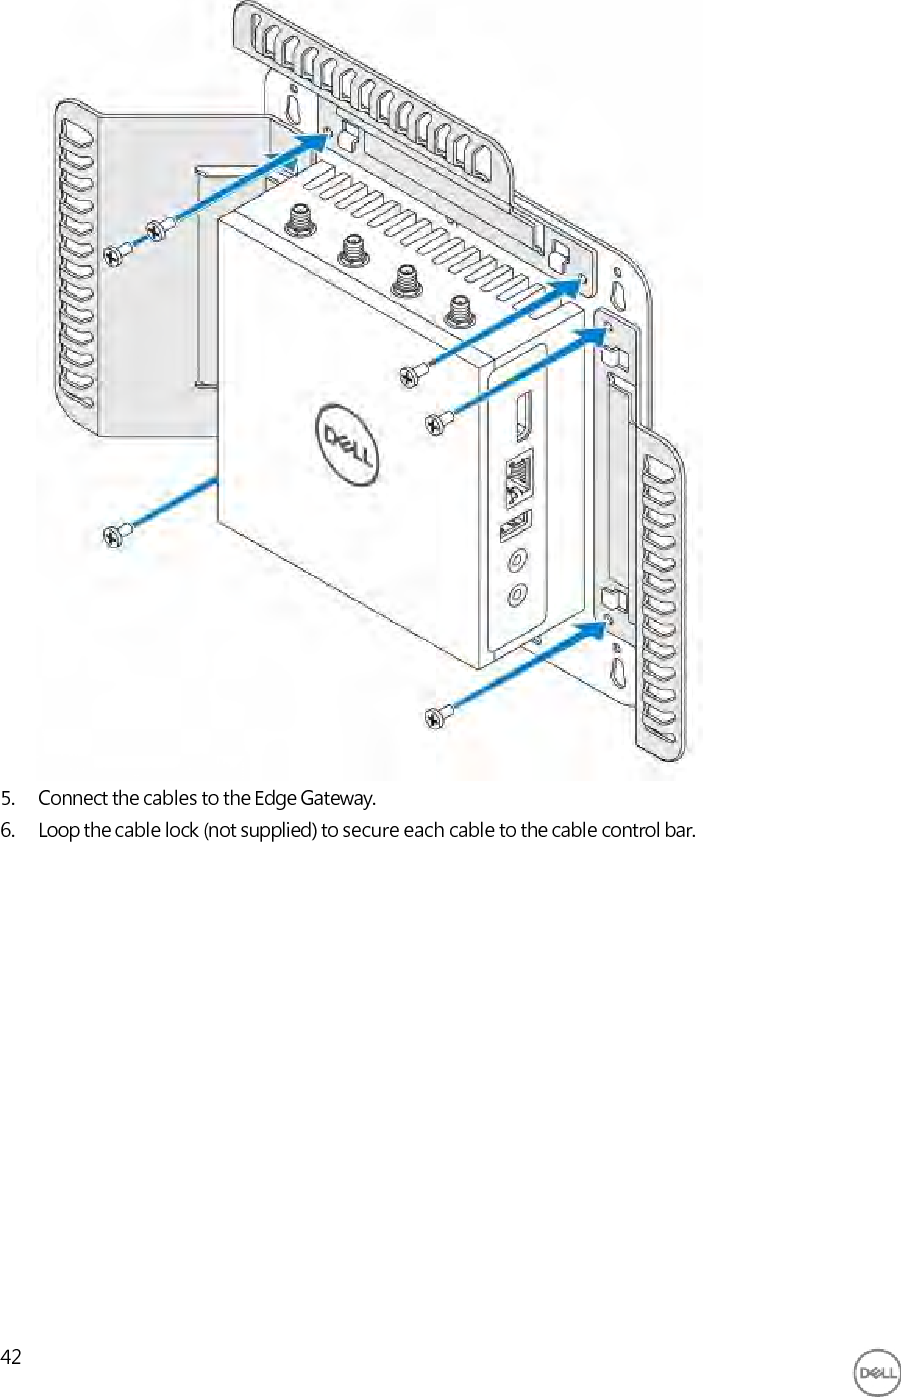                                     5. Connect the cables to the Edge Gateway. 6. Loop the cable lock (not supplied) to secure each cable to the cable control bar.                     42